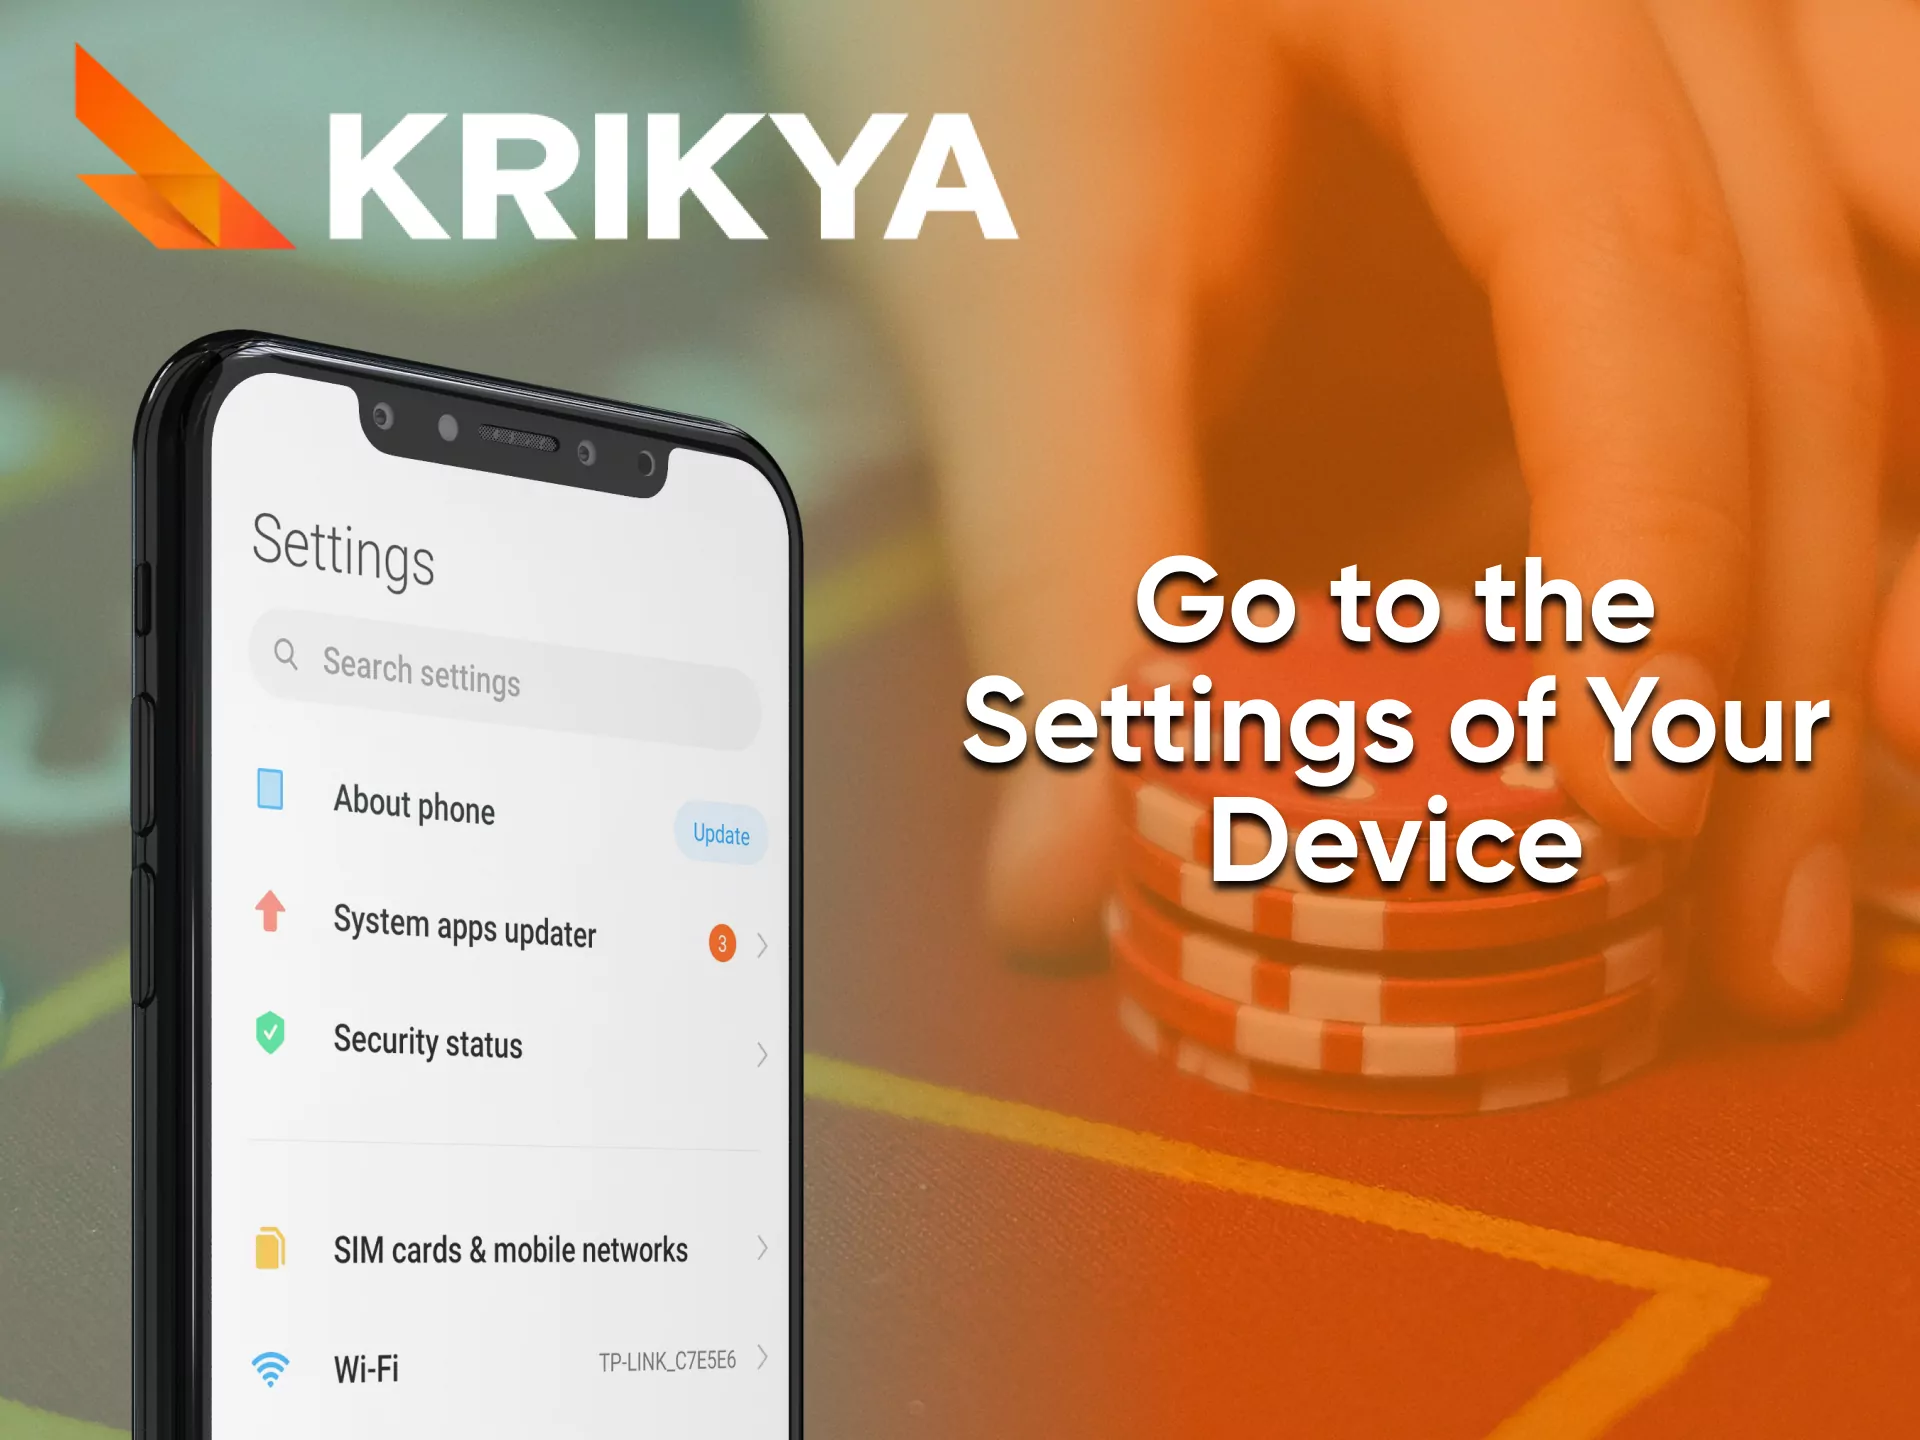 To install the Krikya app, use your phone's settings